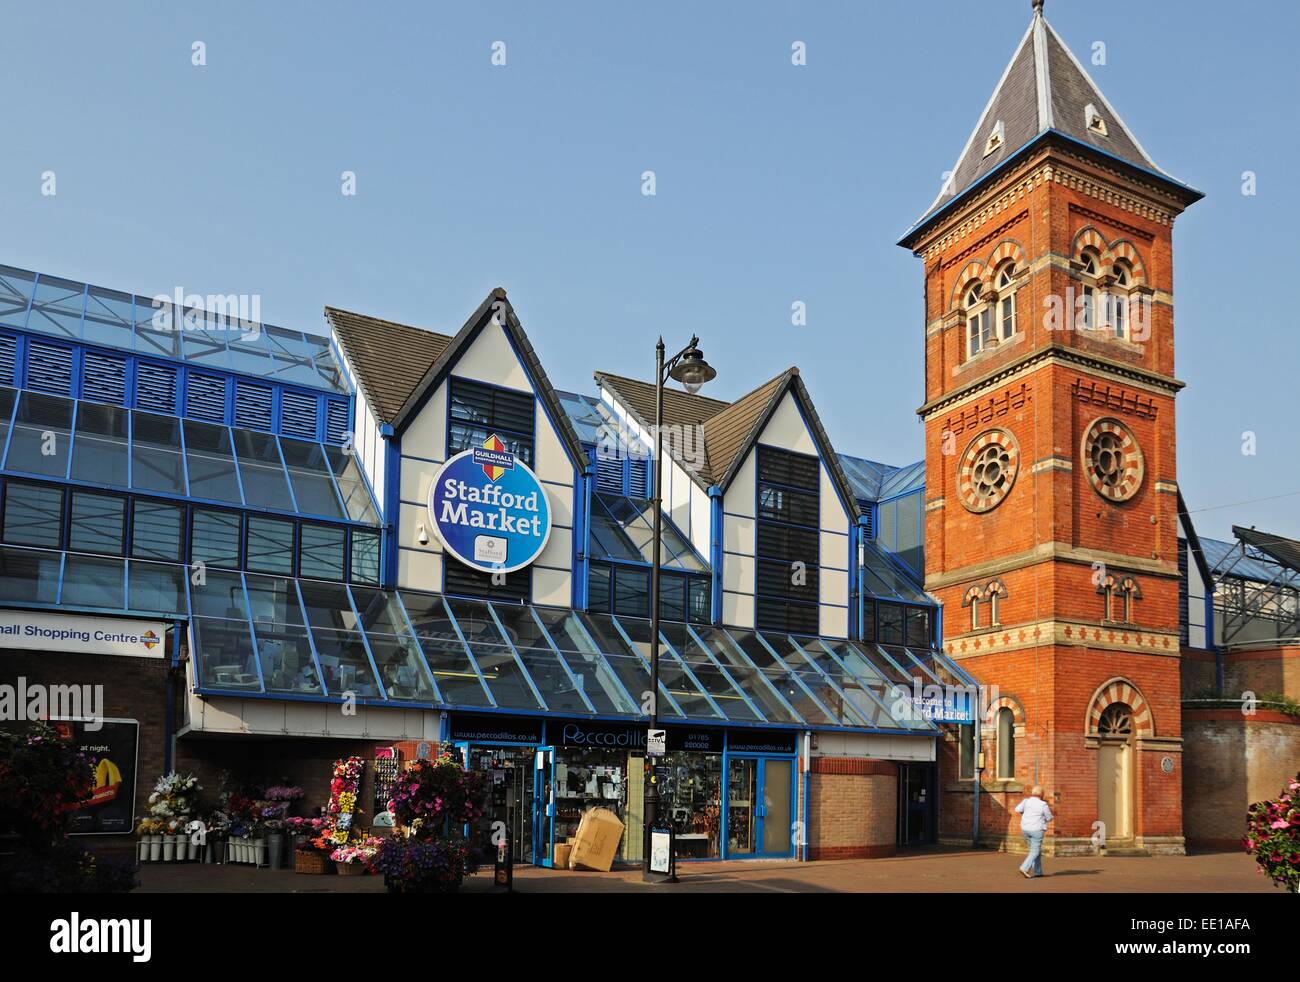 View of Stafford Market, Stafford, Staffordshire, England, UK, Western Europe. Stock Photo